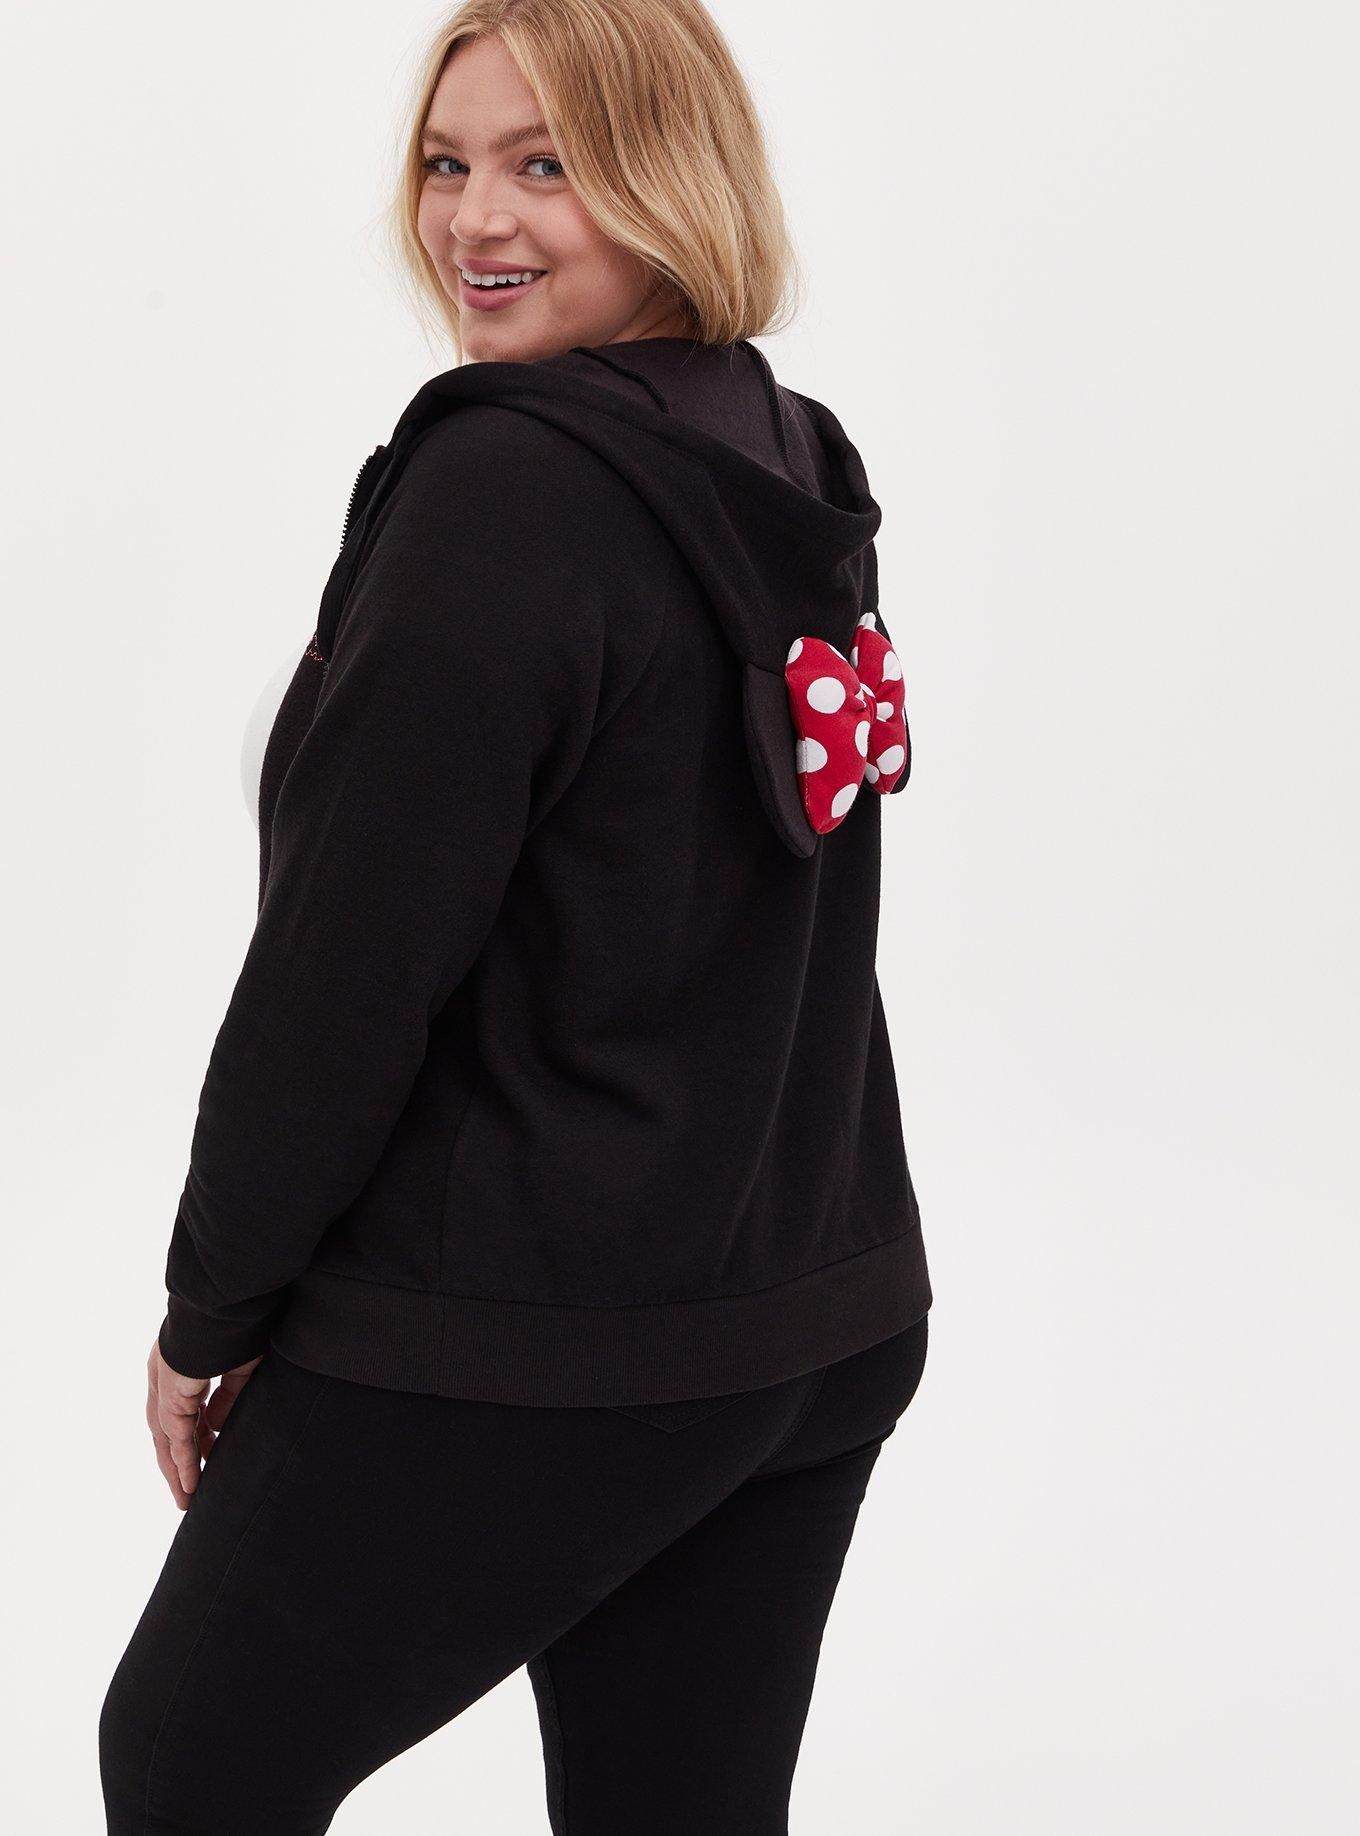 Disney Minnie Mouse Mickey Mouse Girls Fleece Sweatshirt and Flare